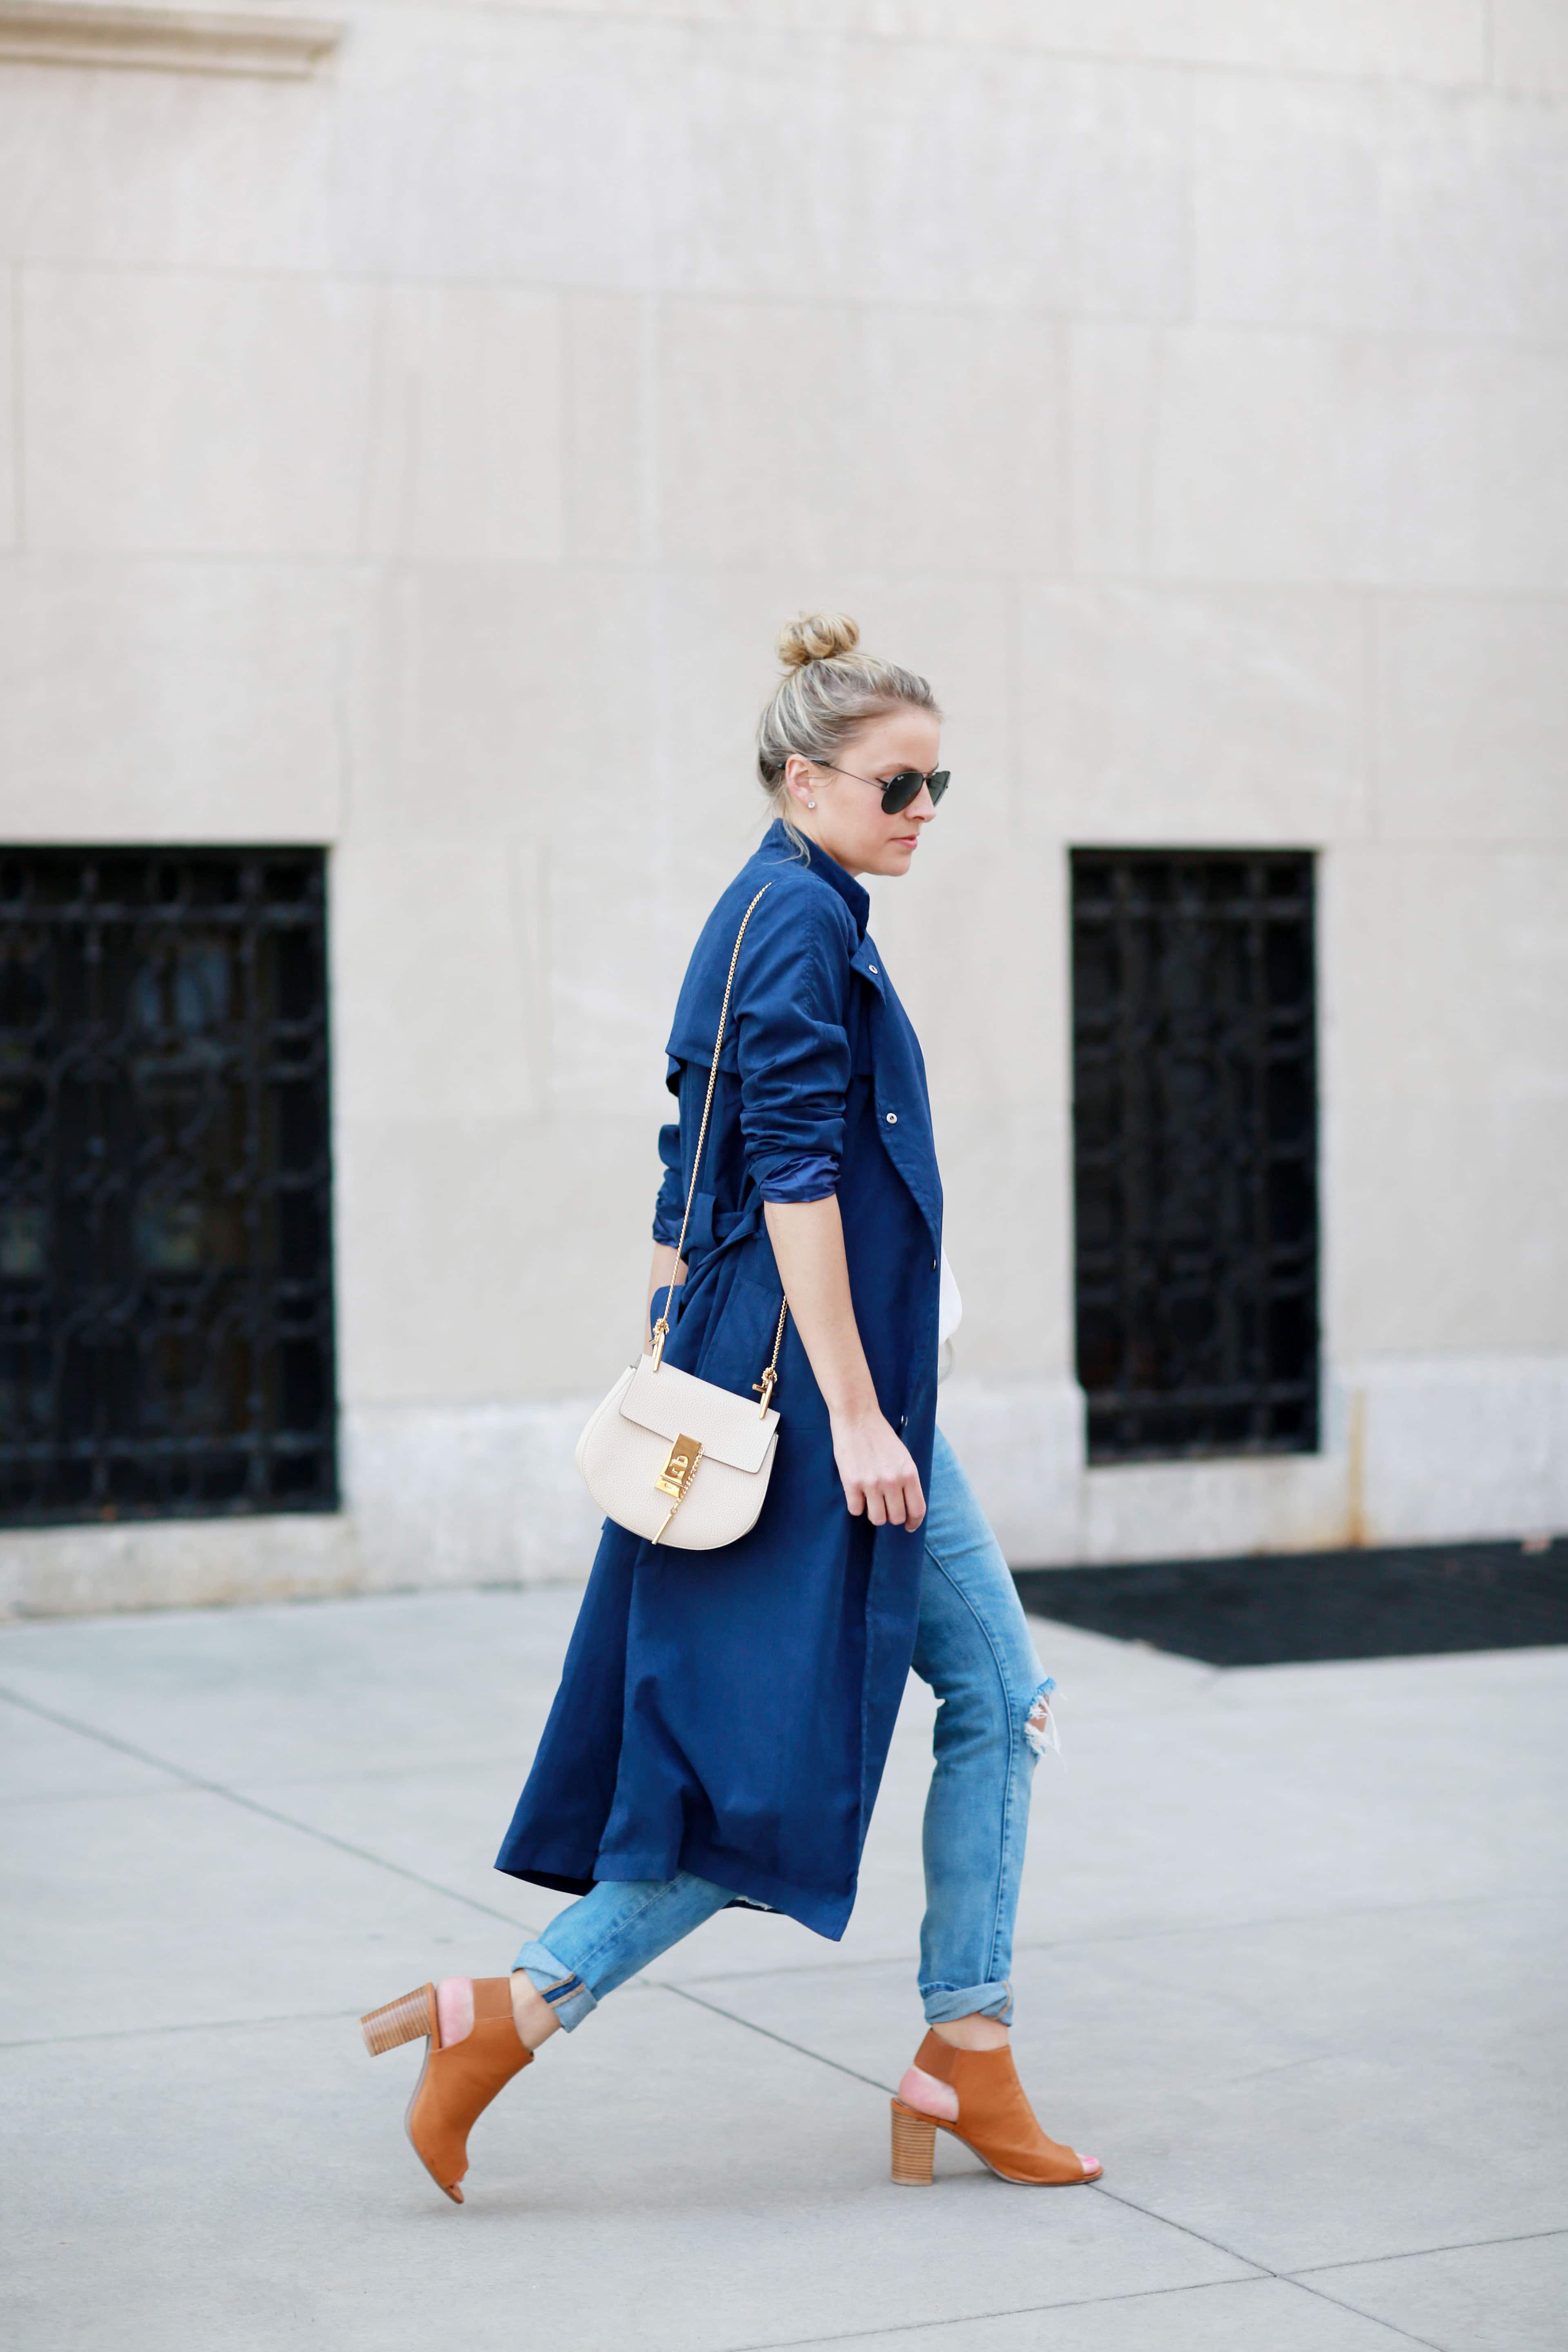 affordable trench coat, top knot